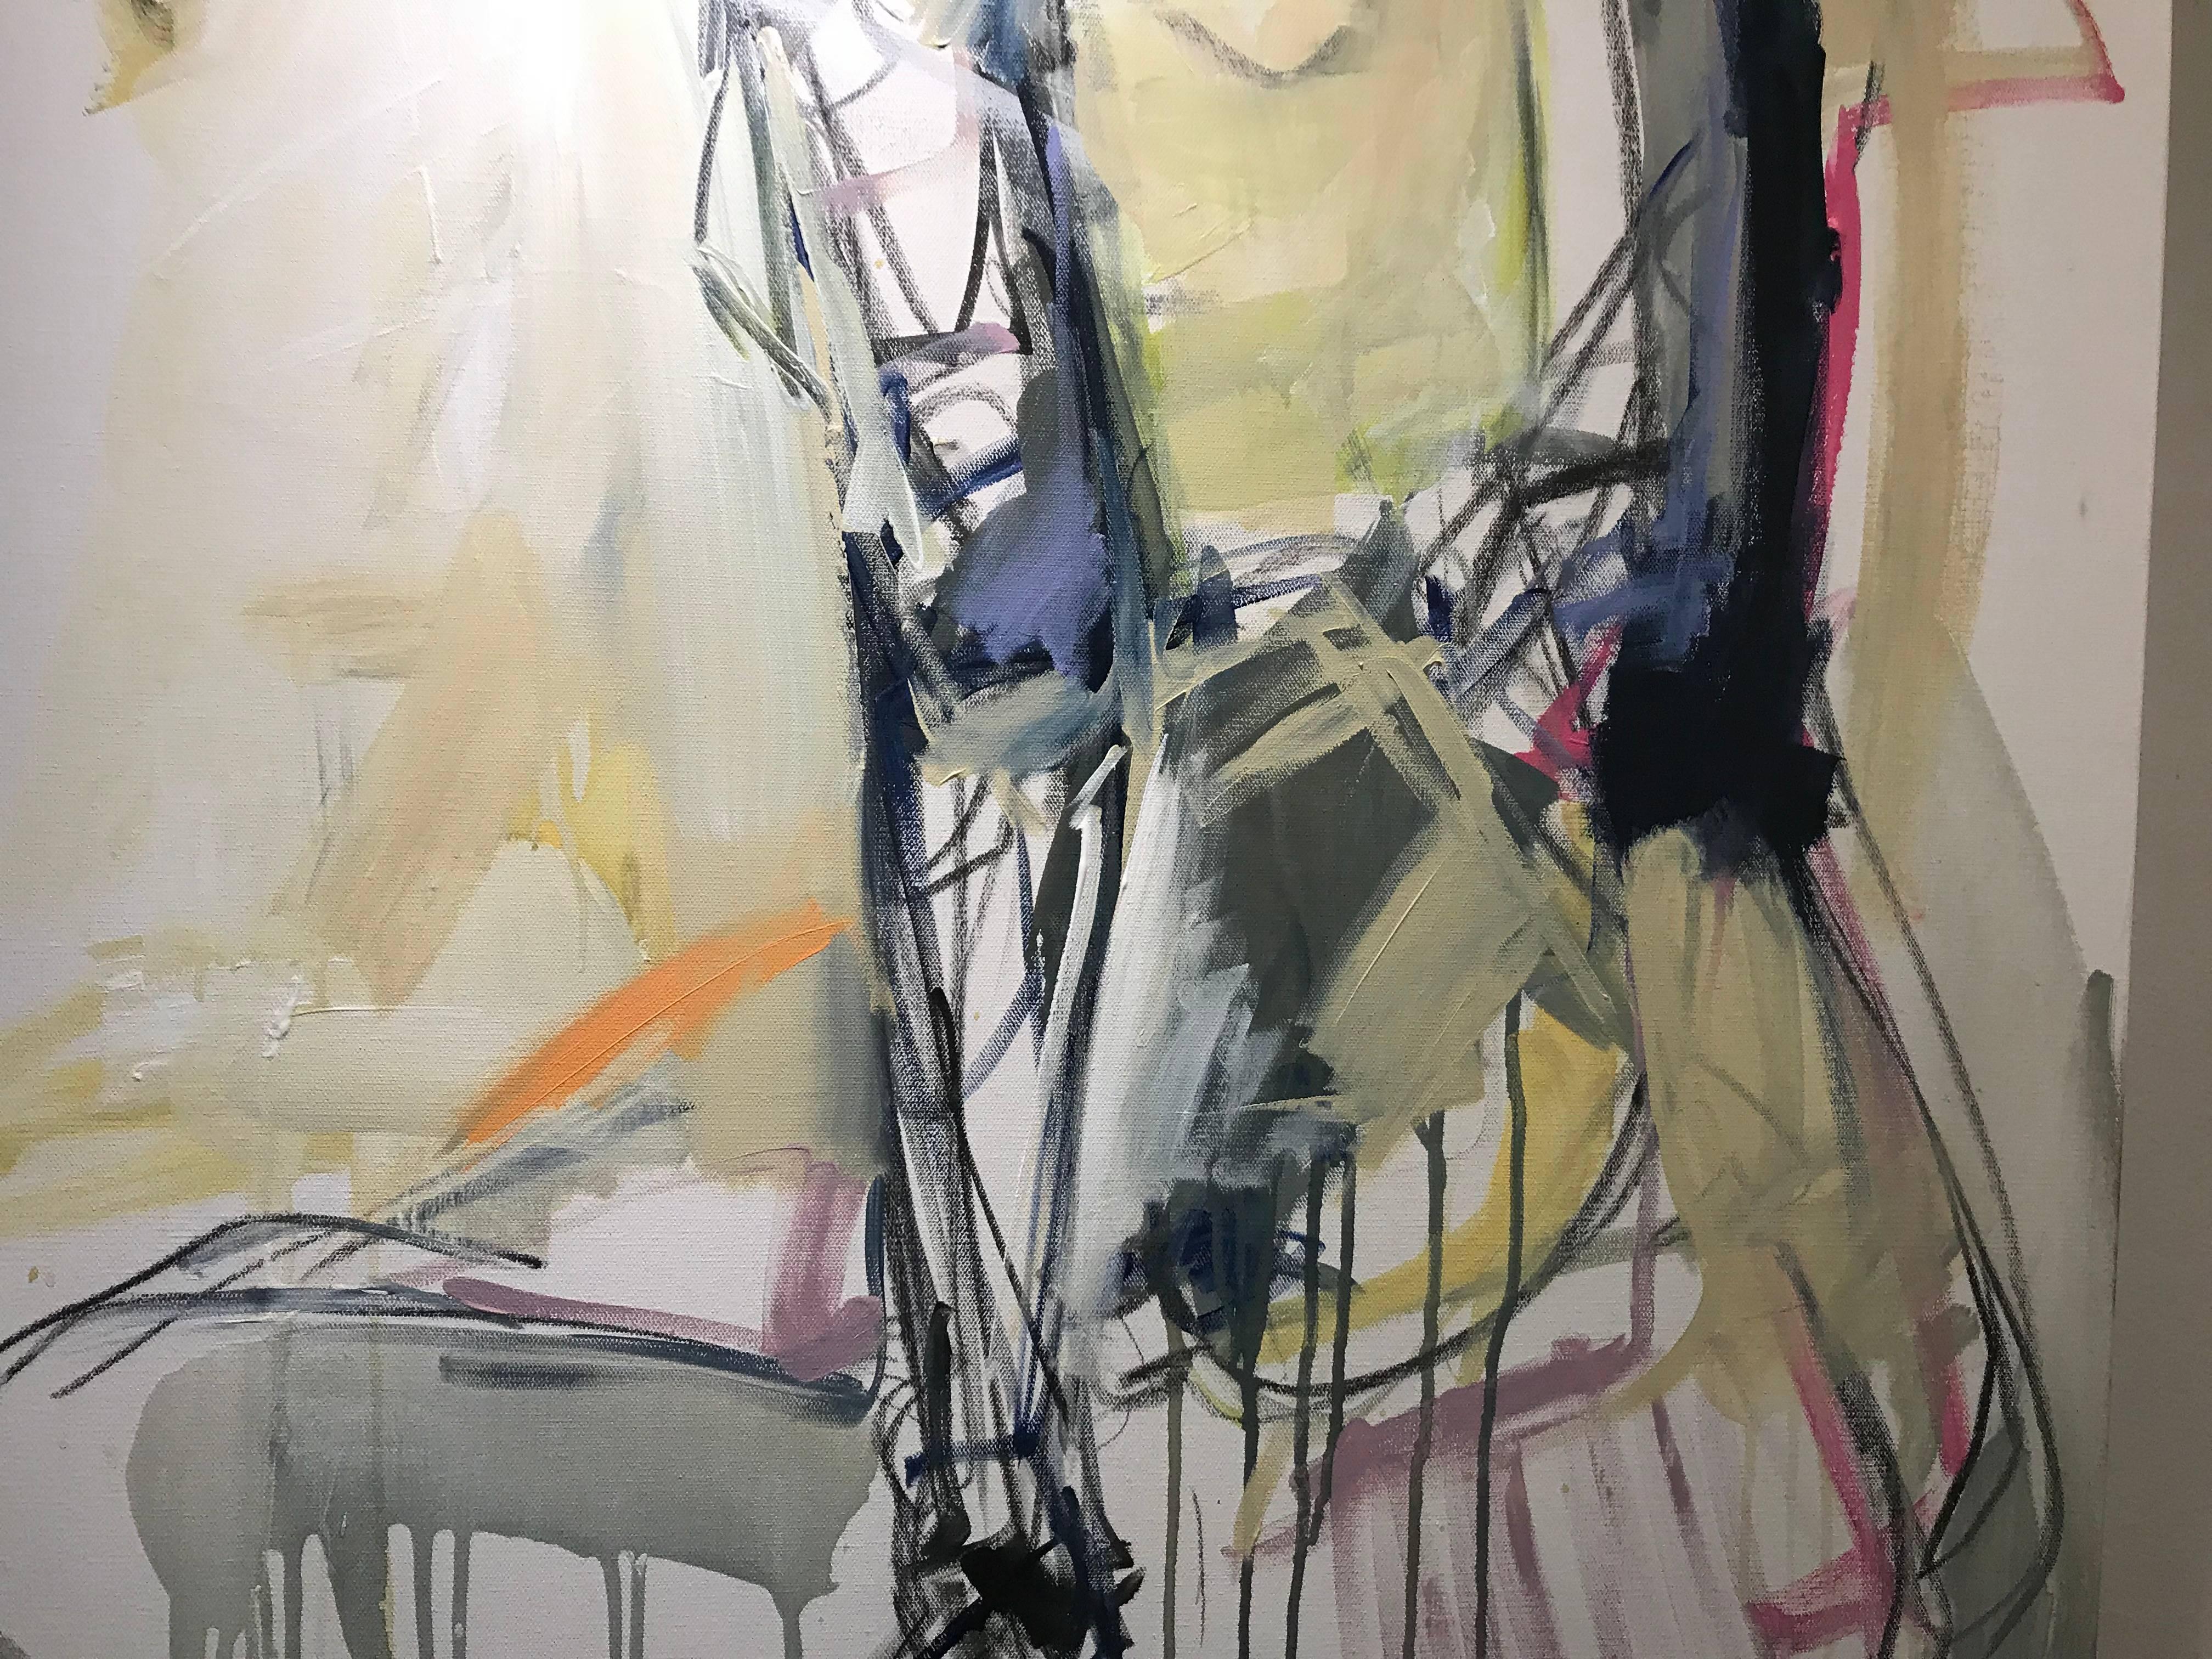 'Drawn In' is a large contemporary acrylic on canvas created in 2017 by American artist Kelley Ogburn. Featuring a nude seen from the back, the technique is rapid and precise. With a technique leaning towards abstraction, the artist depicted a young